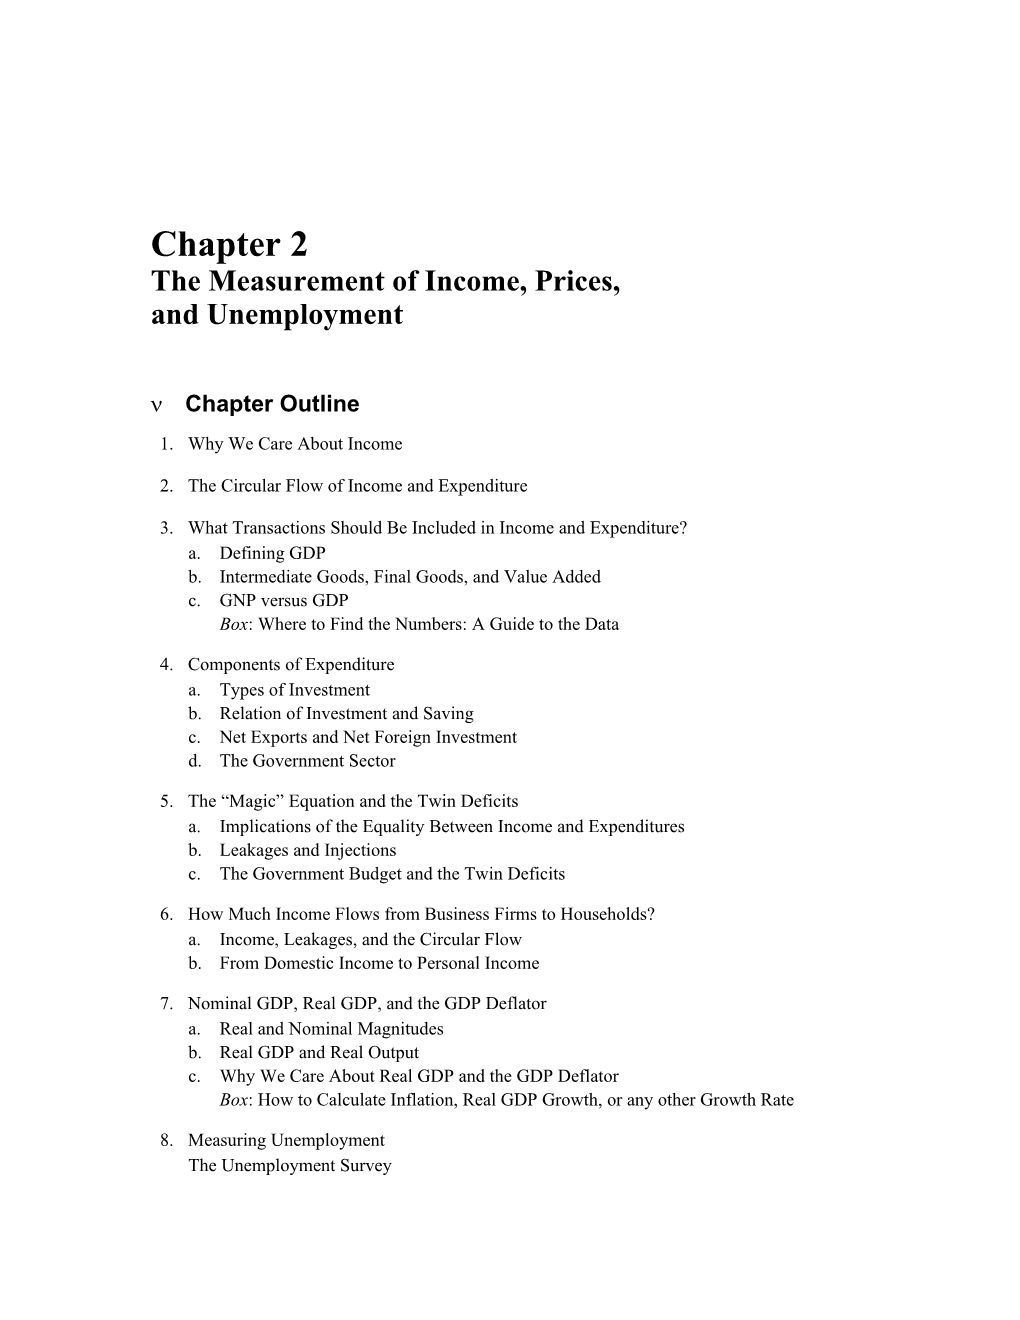 Chapter 2 the Measurement of Income, Prices, and Unemployment 15